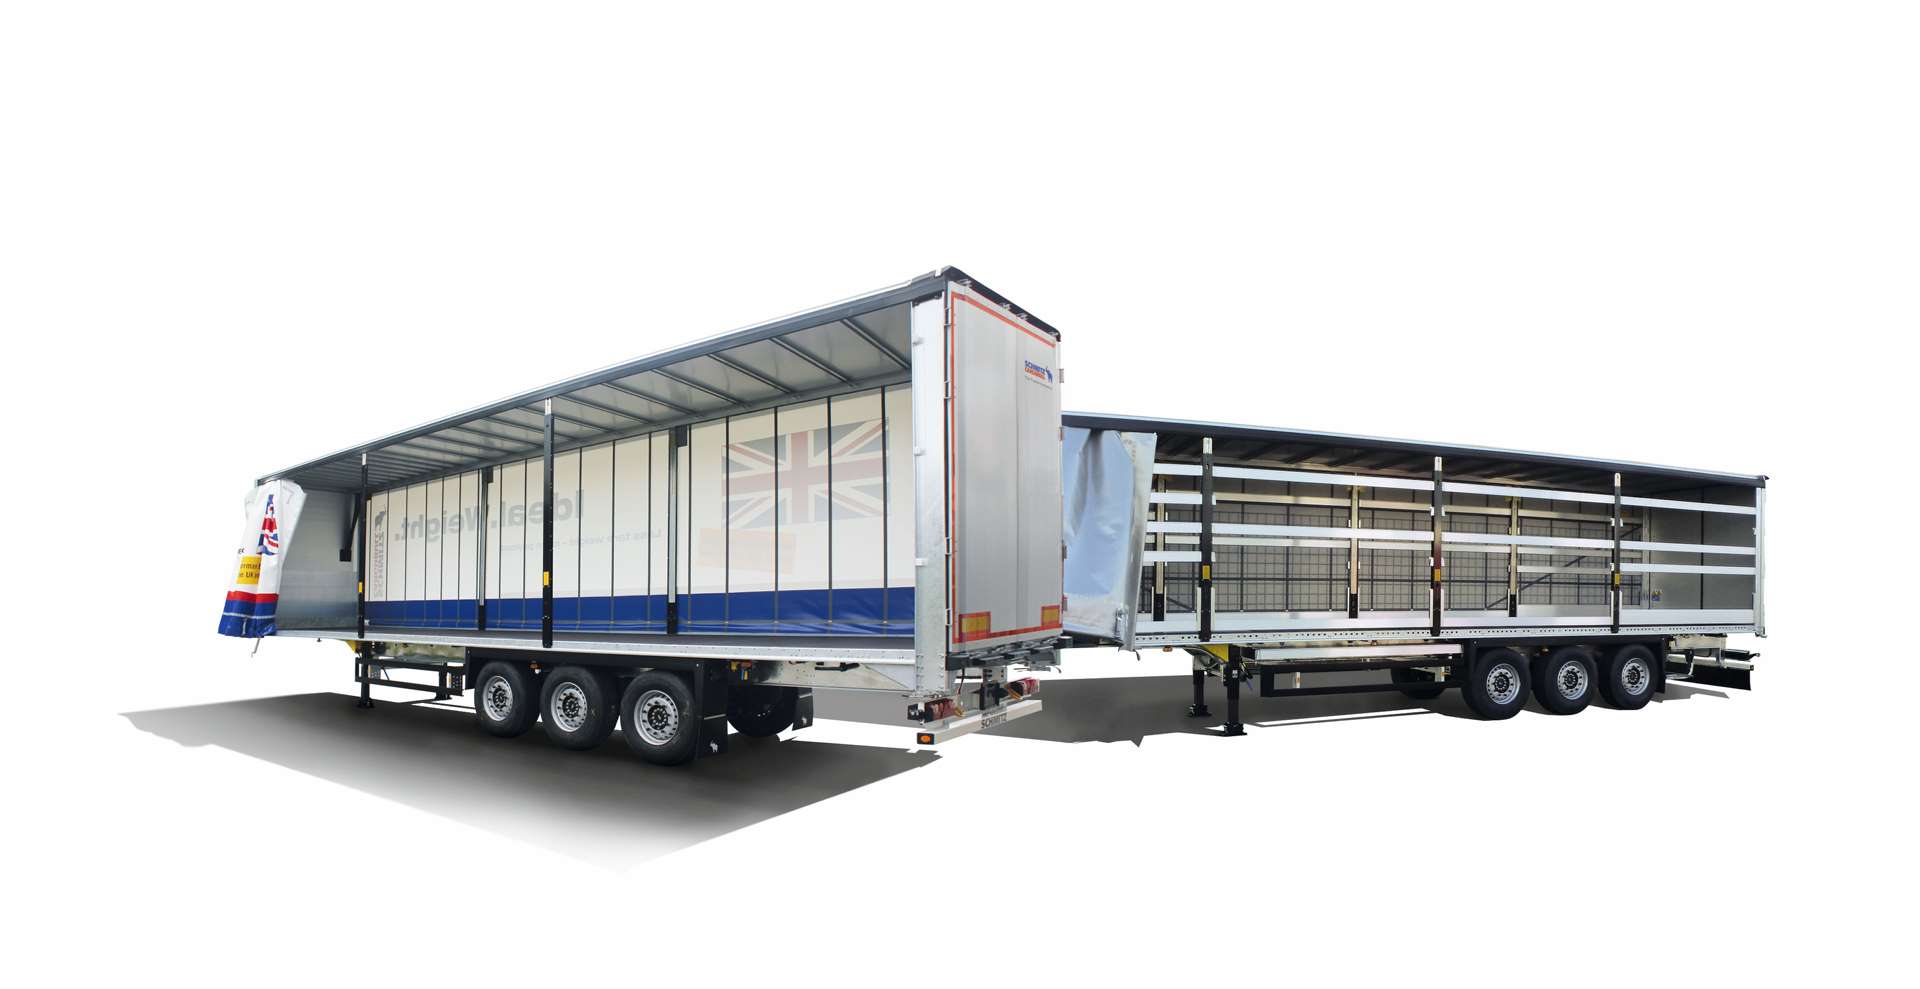 S.CS FIXED ROOF curtainsider semi-trailer with various load securing options